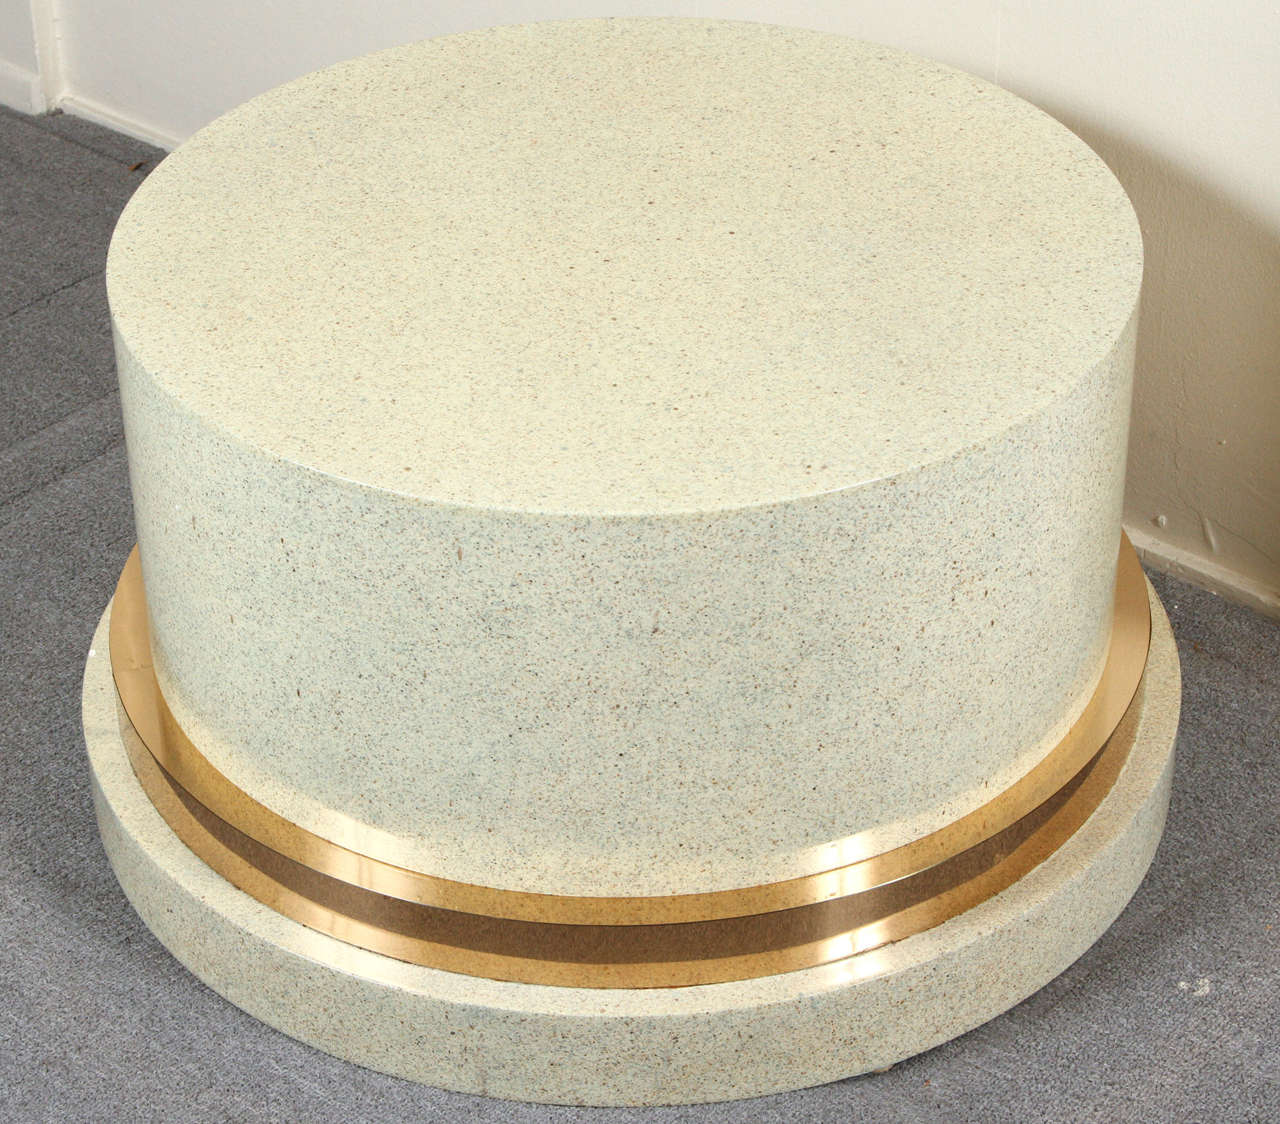 Low pedestal, which may be used as a coffee table base.
It is of wood with a faux stone finish and brass accent.
The table has a 36